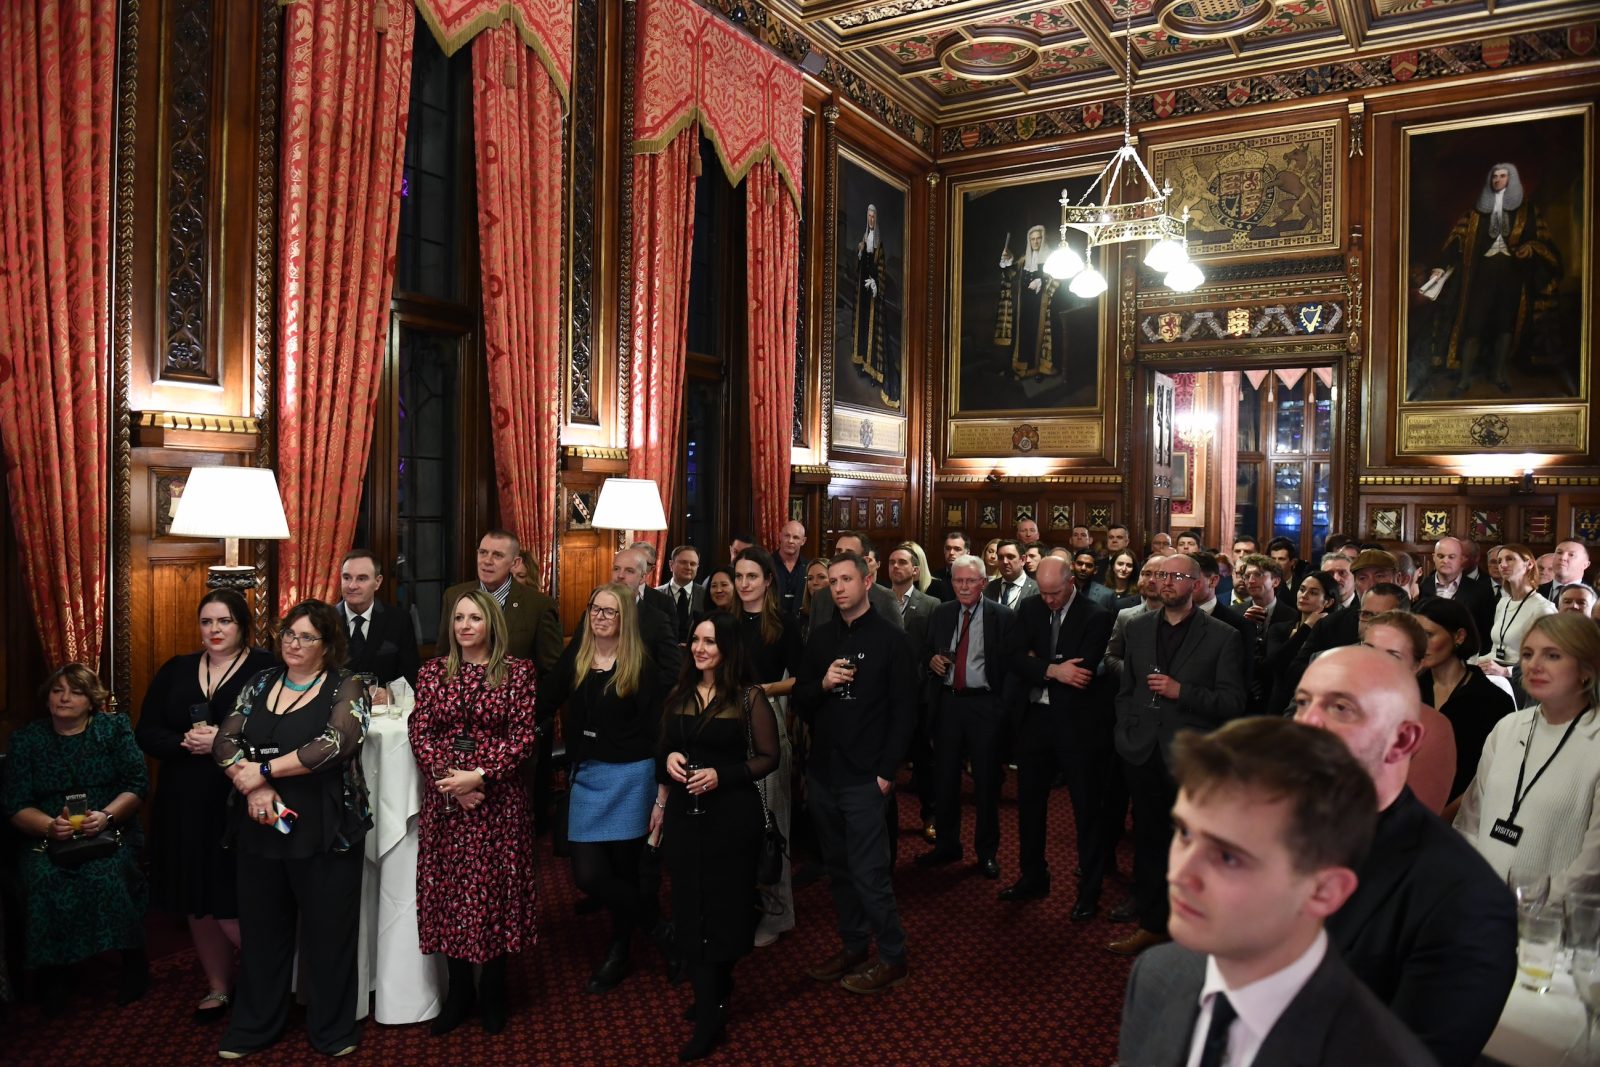 World class work of RL Cares celebrated at Speaker’s House